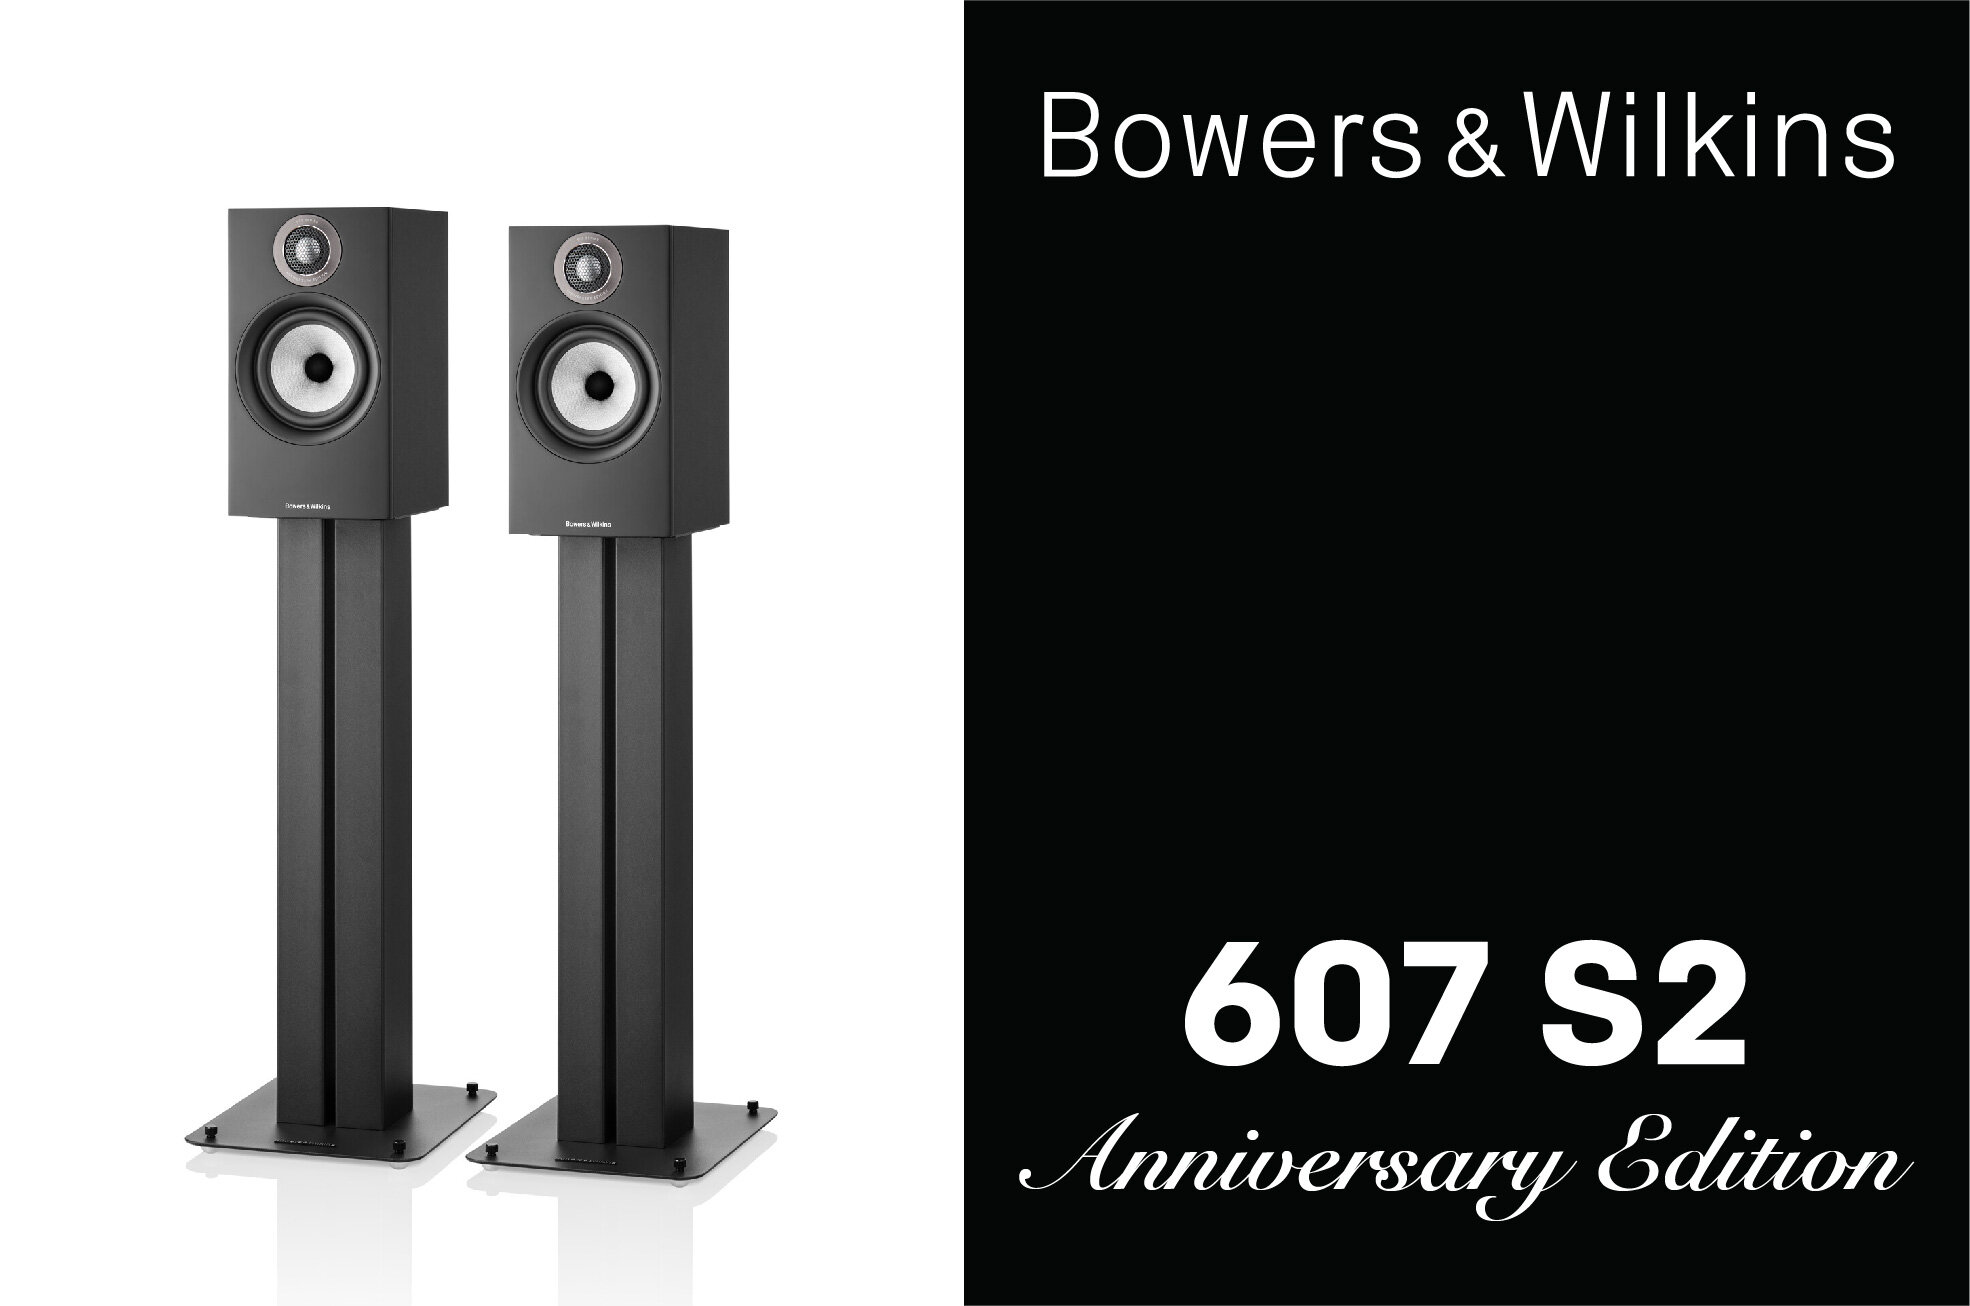 Bowers Wilkins 607 "Anniversary Edition"